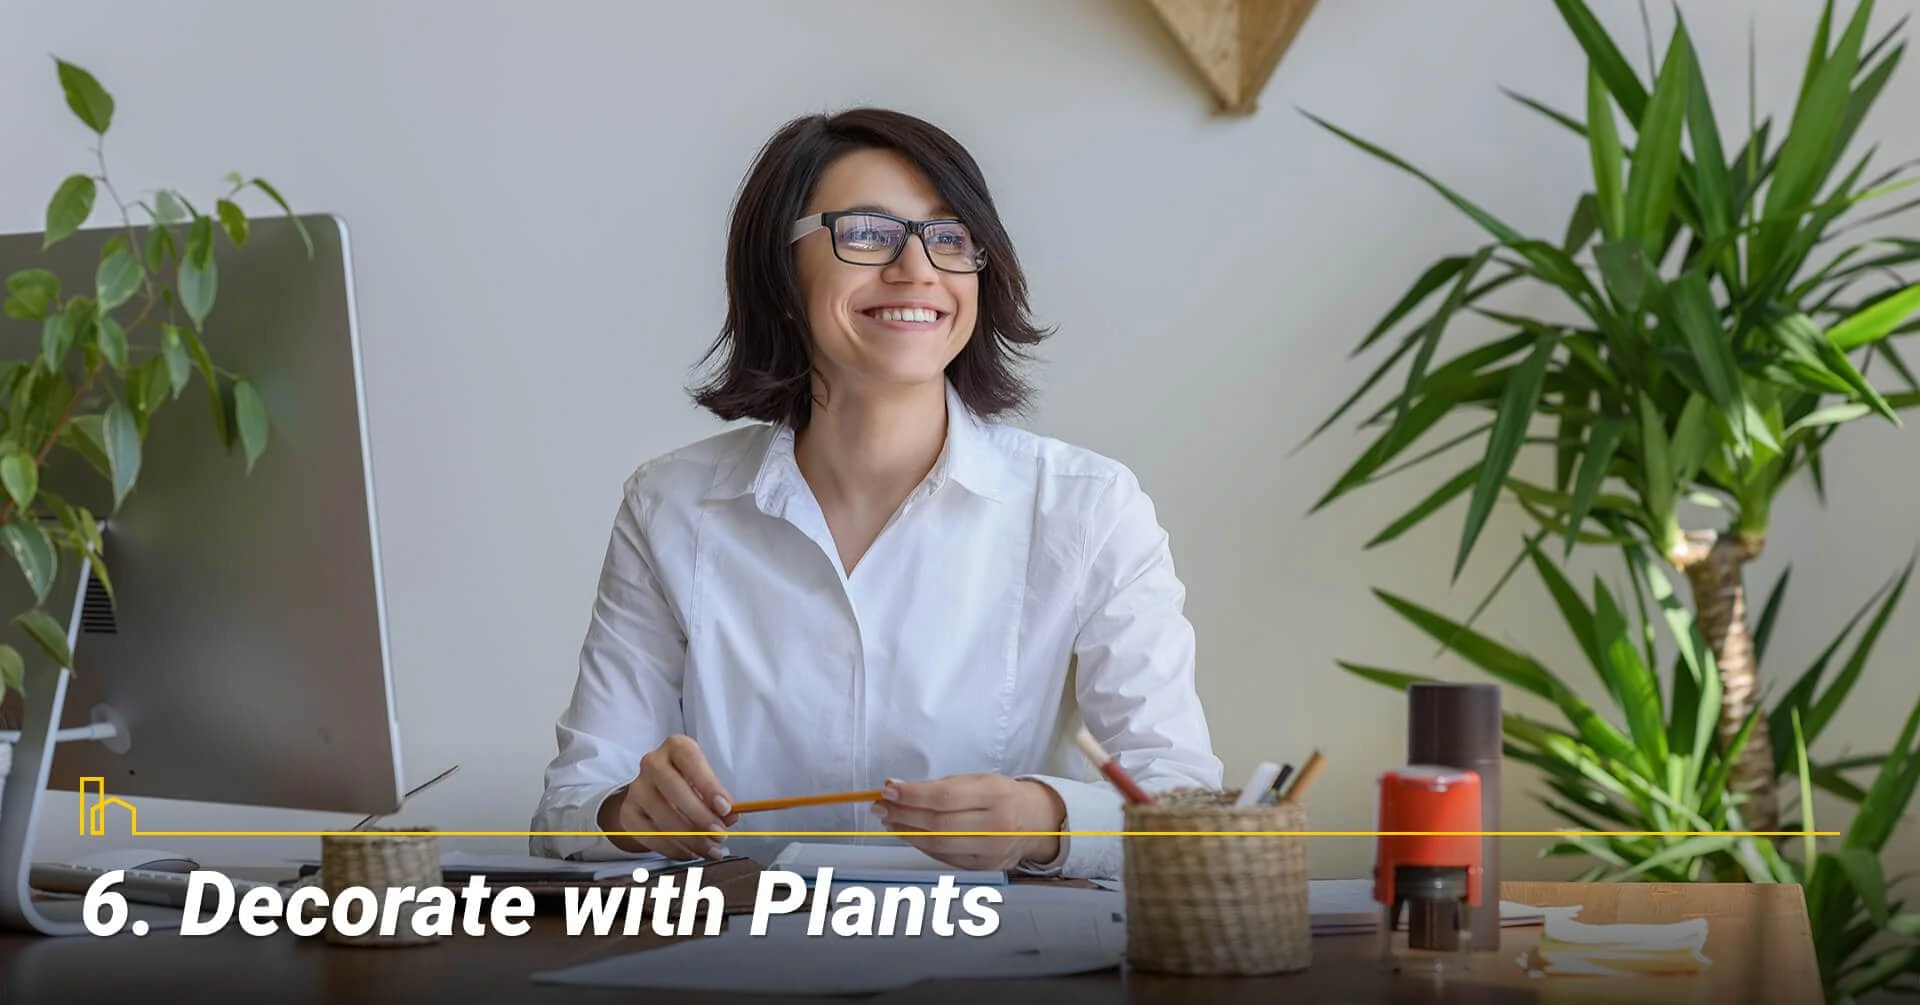 Decorate with Plants, use plants around the house